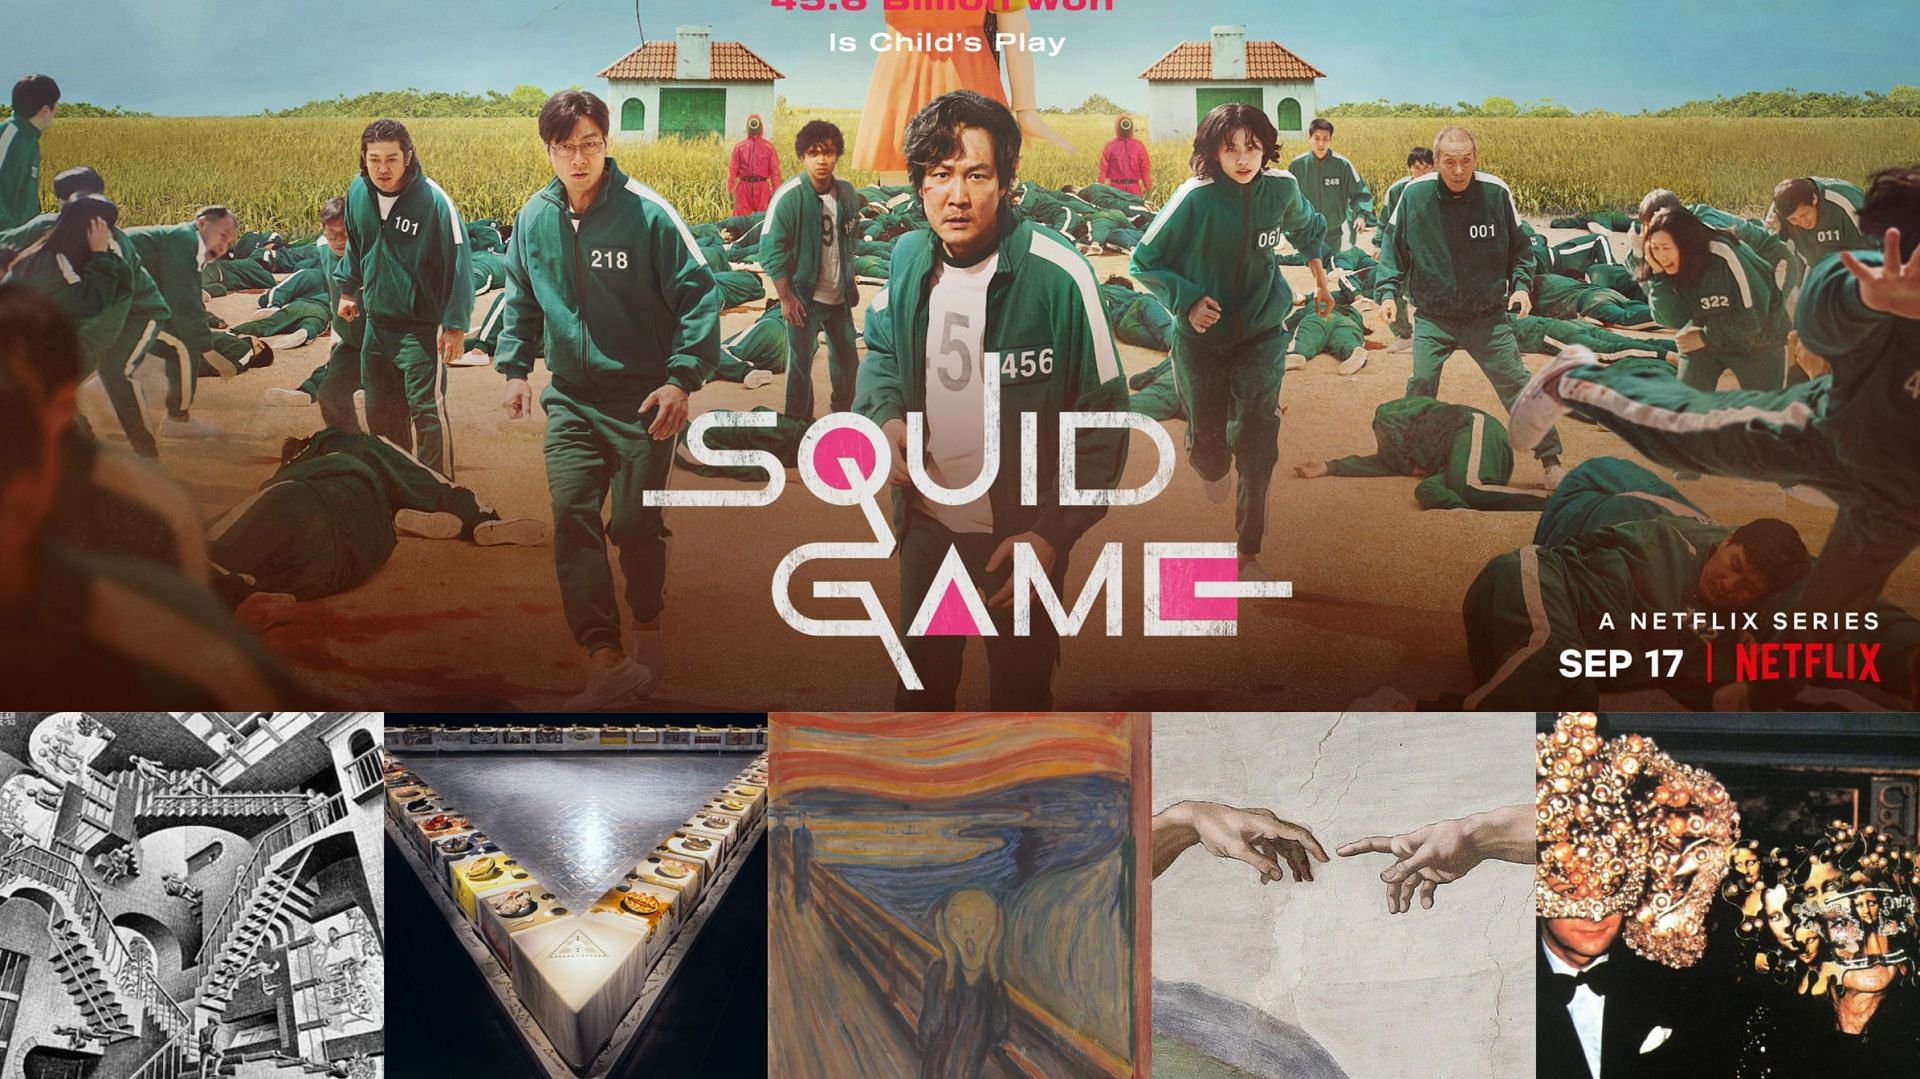 Several viewers have remarked how Squid Game scenes have been inspired by artwork. (Image via Netflix, Wikipedia)